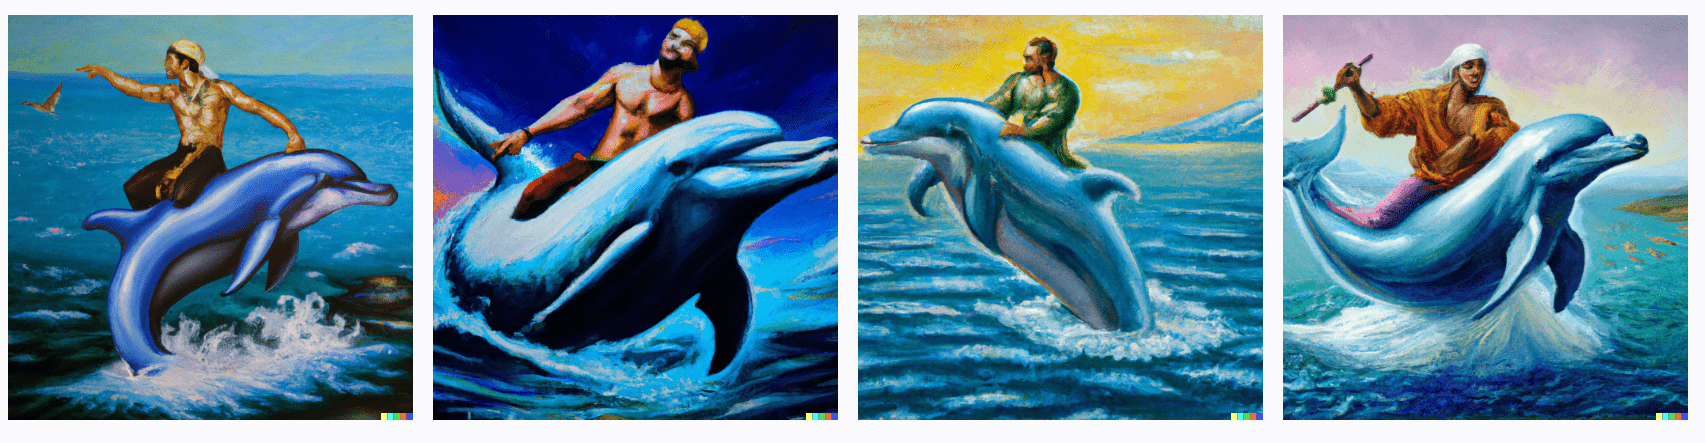 Oil painting of Drake riding a dolphin